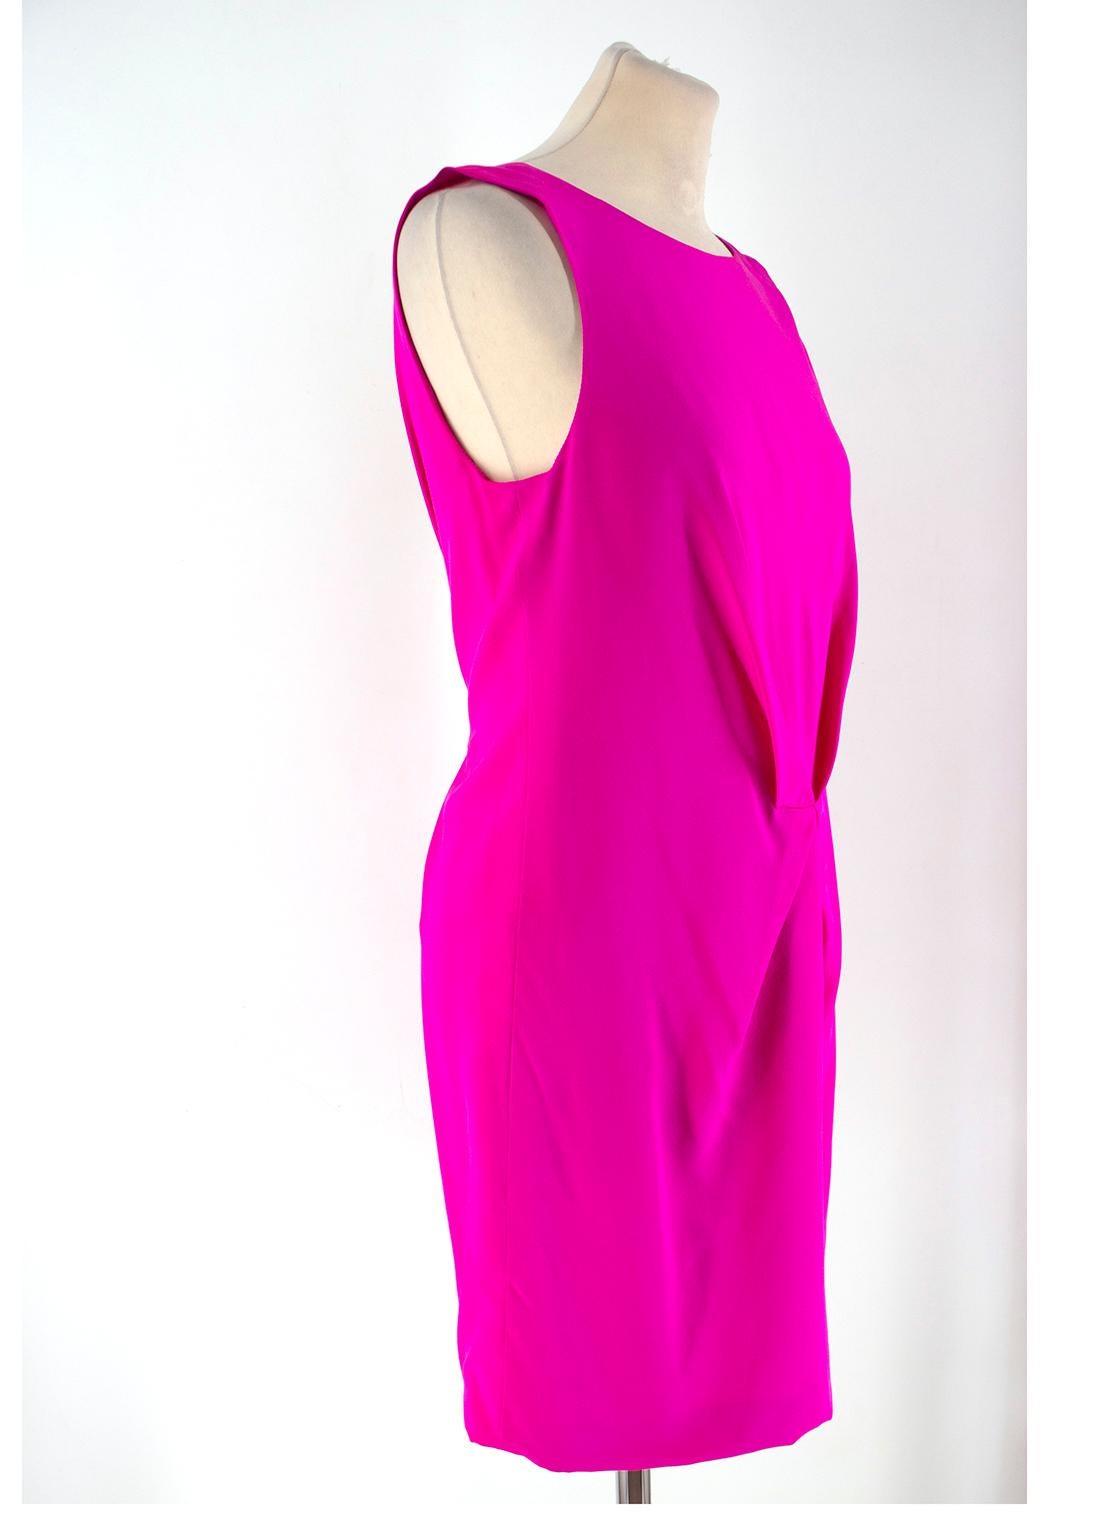 Versace Pink Gathered Dress

-Bright pink silk gathered dress
-Gathered at the waist
-Open back detailing
-Side zip closure
-Sleeveless mini dress

Please note, these items are pre-owned and may show signs of being stored even when unworn and